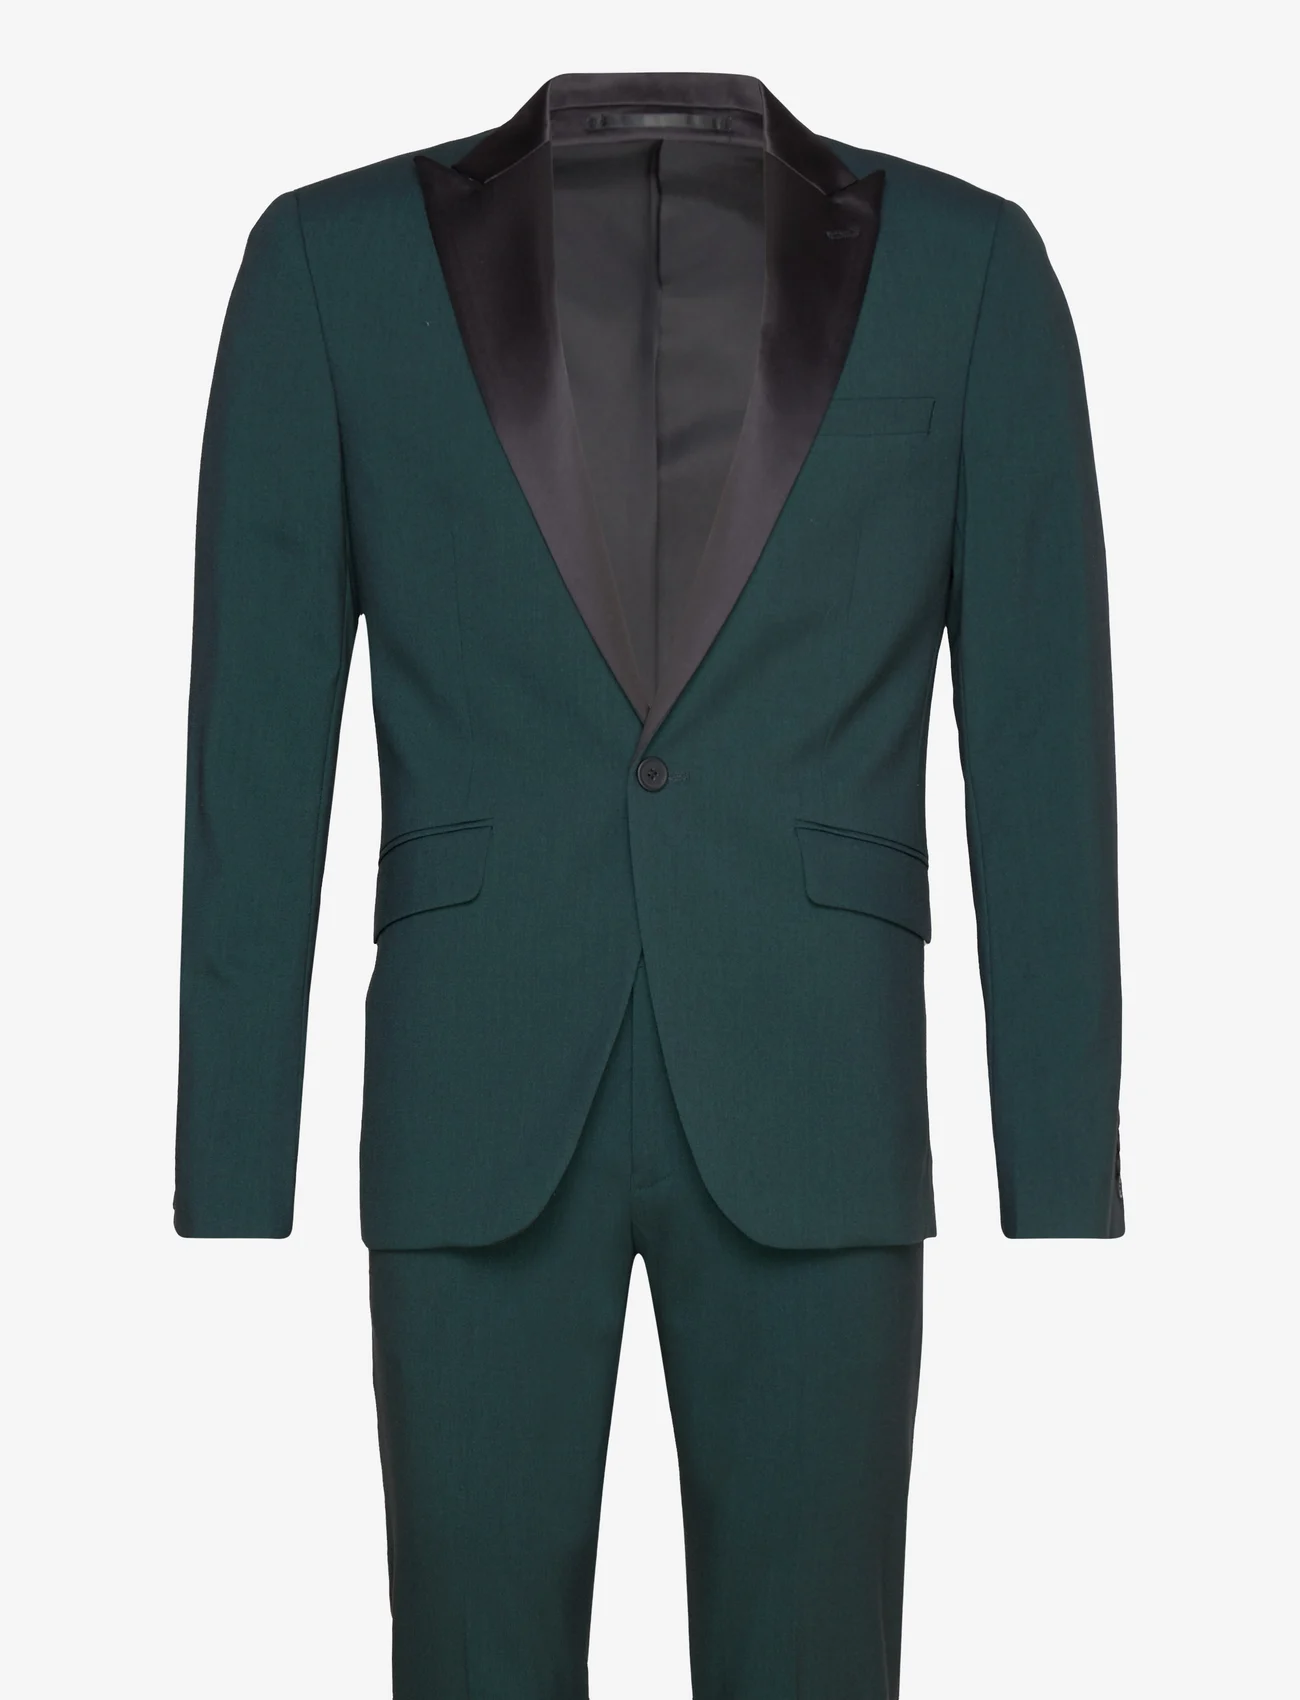 Lindbergh - Responsibly made stretch tuxedo sui - tuxedos - bottle green - 0